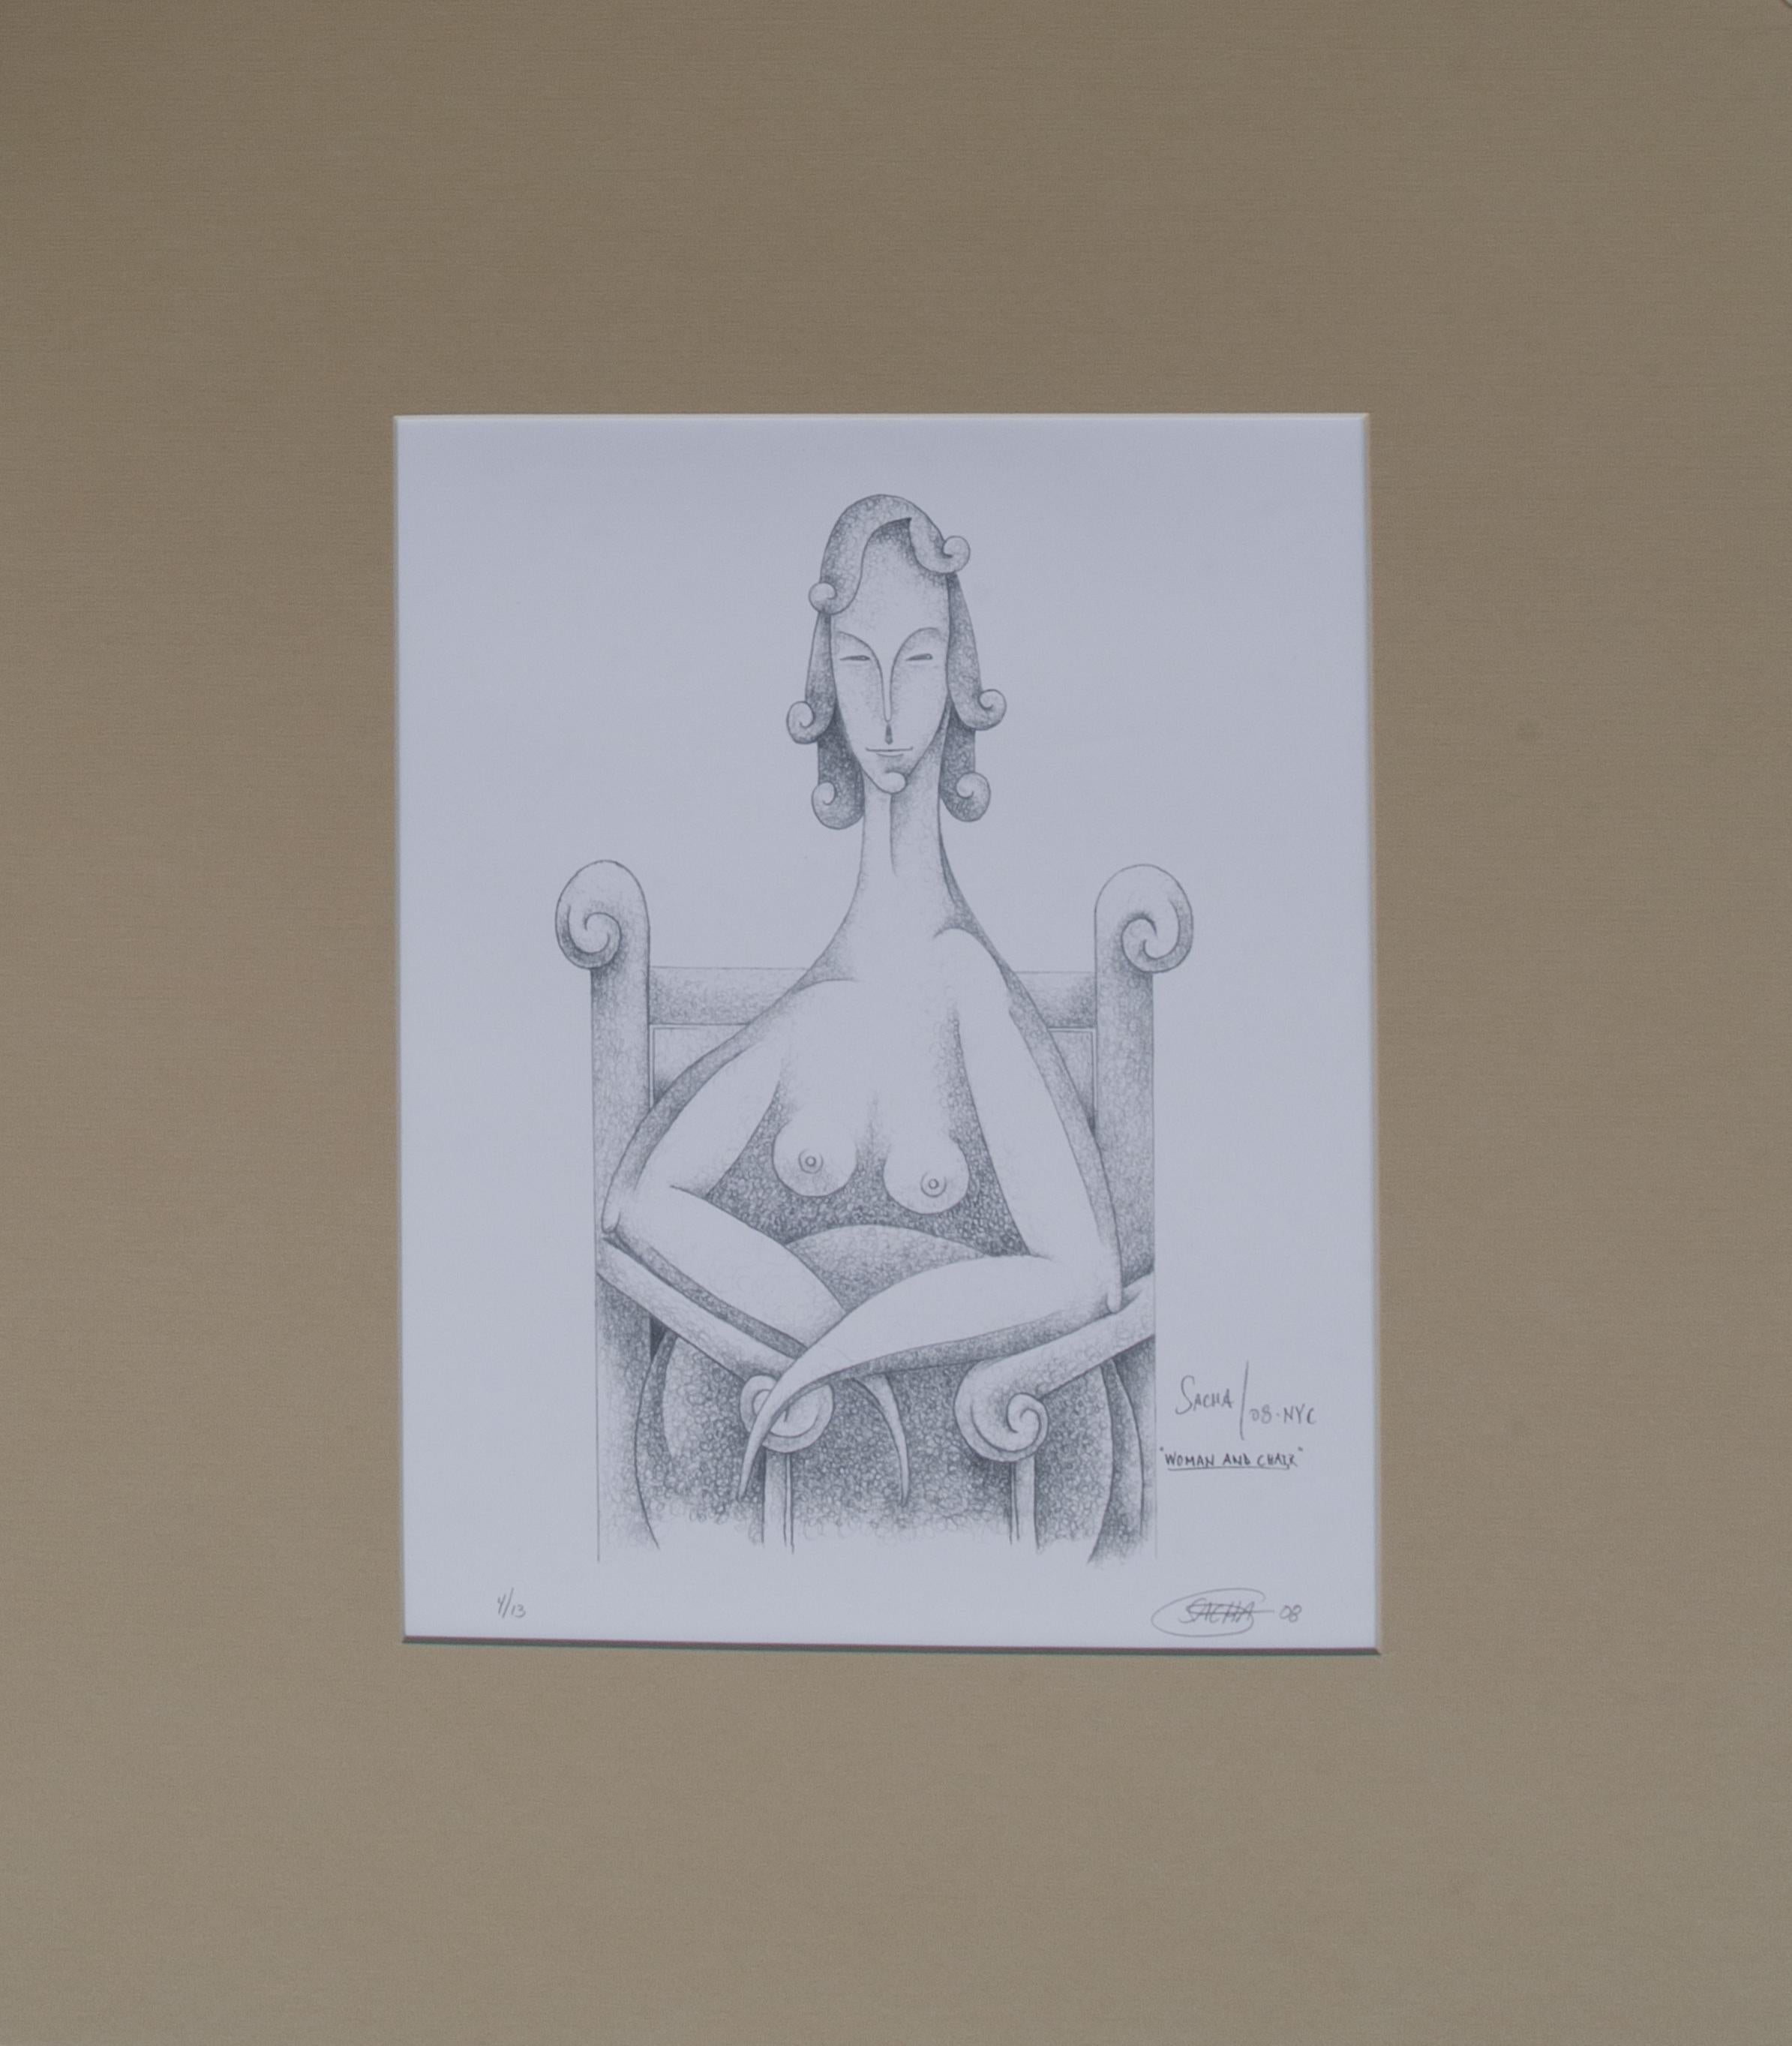 SACHA (American, b. 1965)
Woman and Chair, 2006
Lithograph
20 x 16 in.
Signed and inscribed lower right: Sacha '08 NYC 